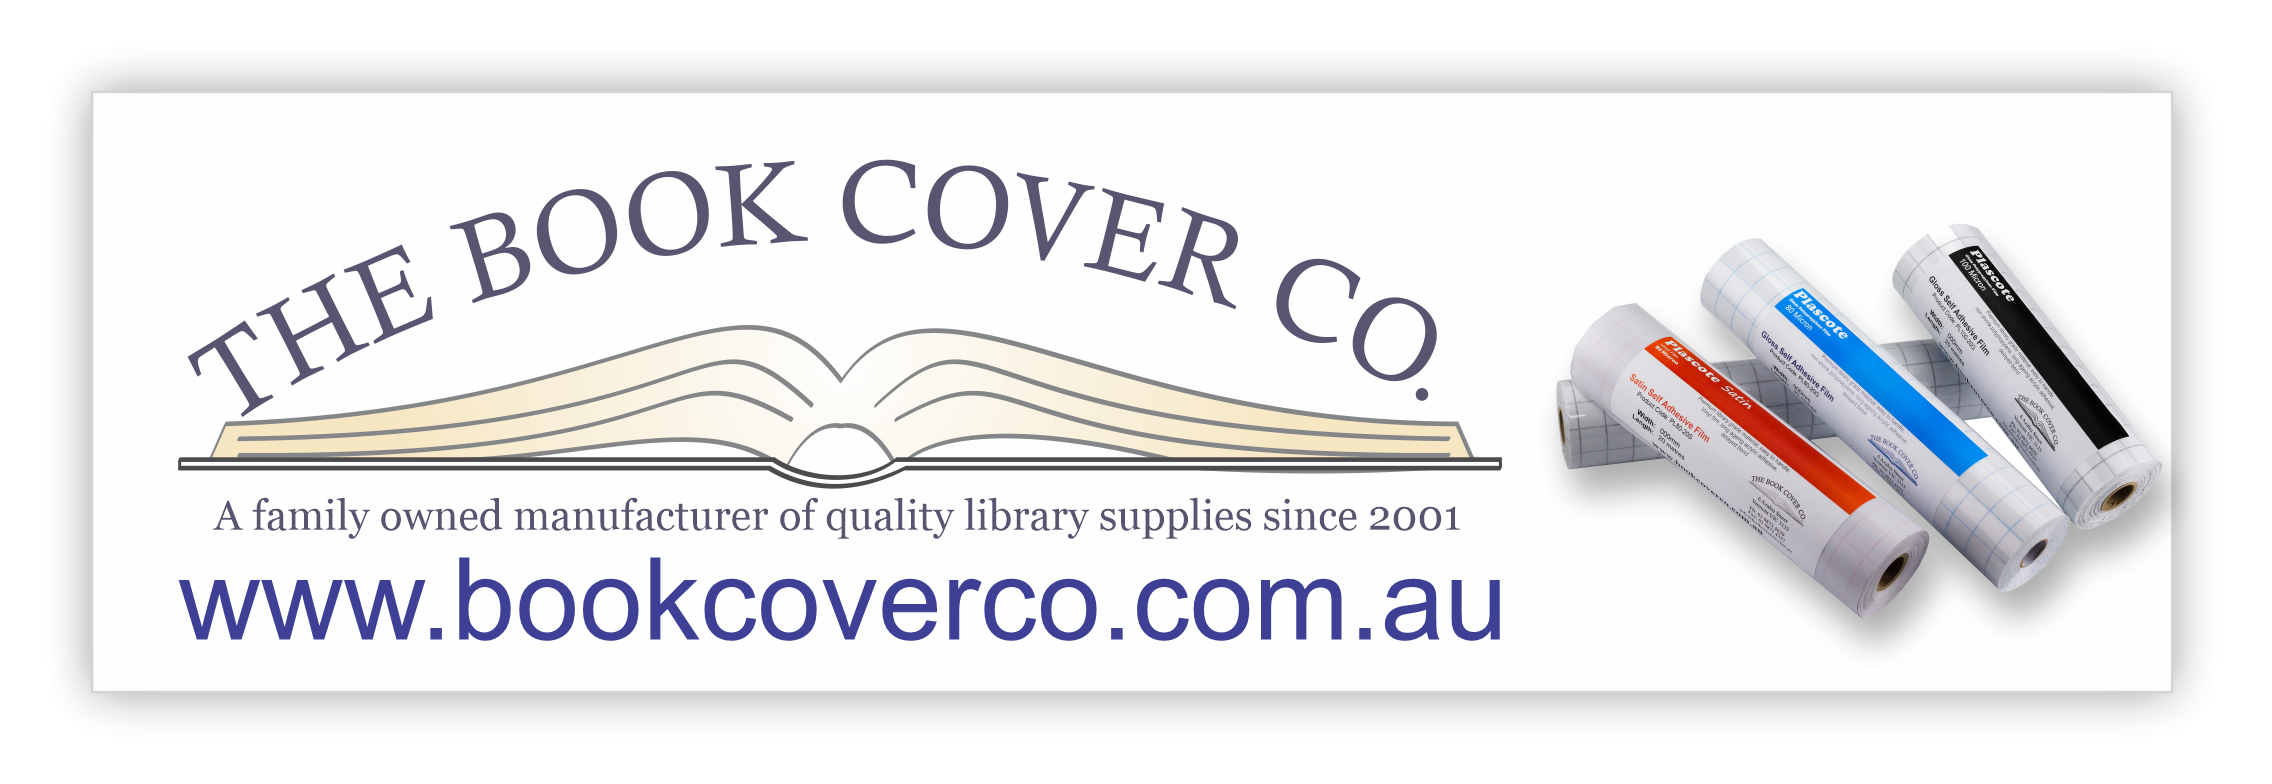 The Book Cover Co